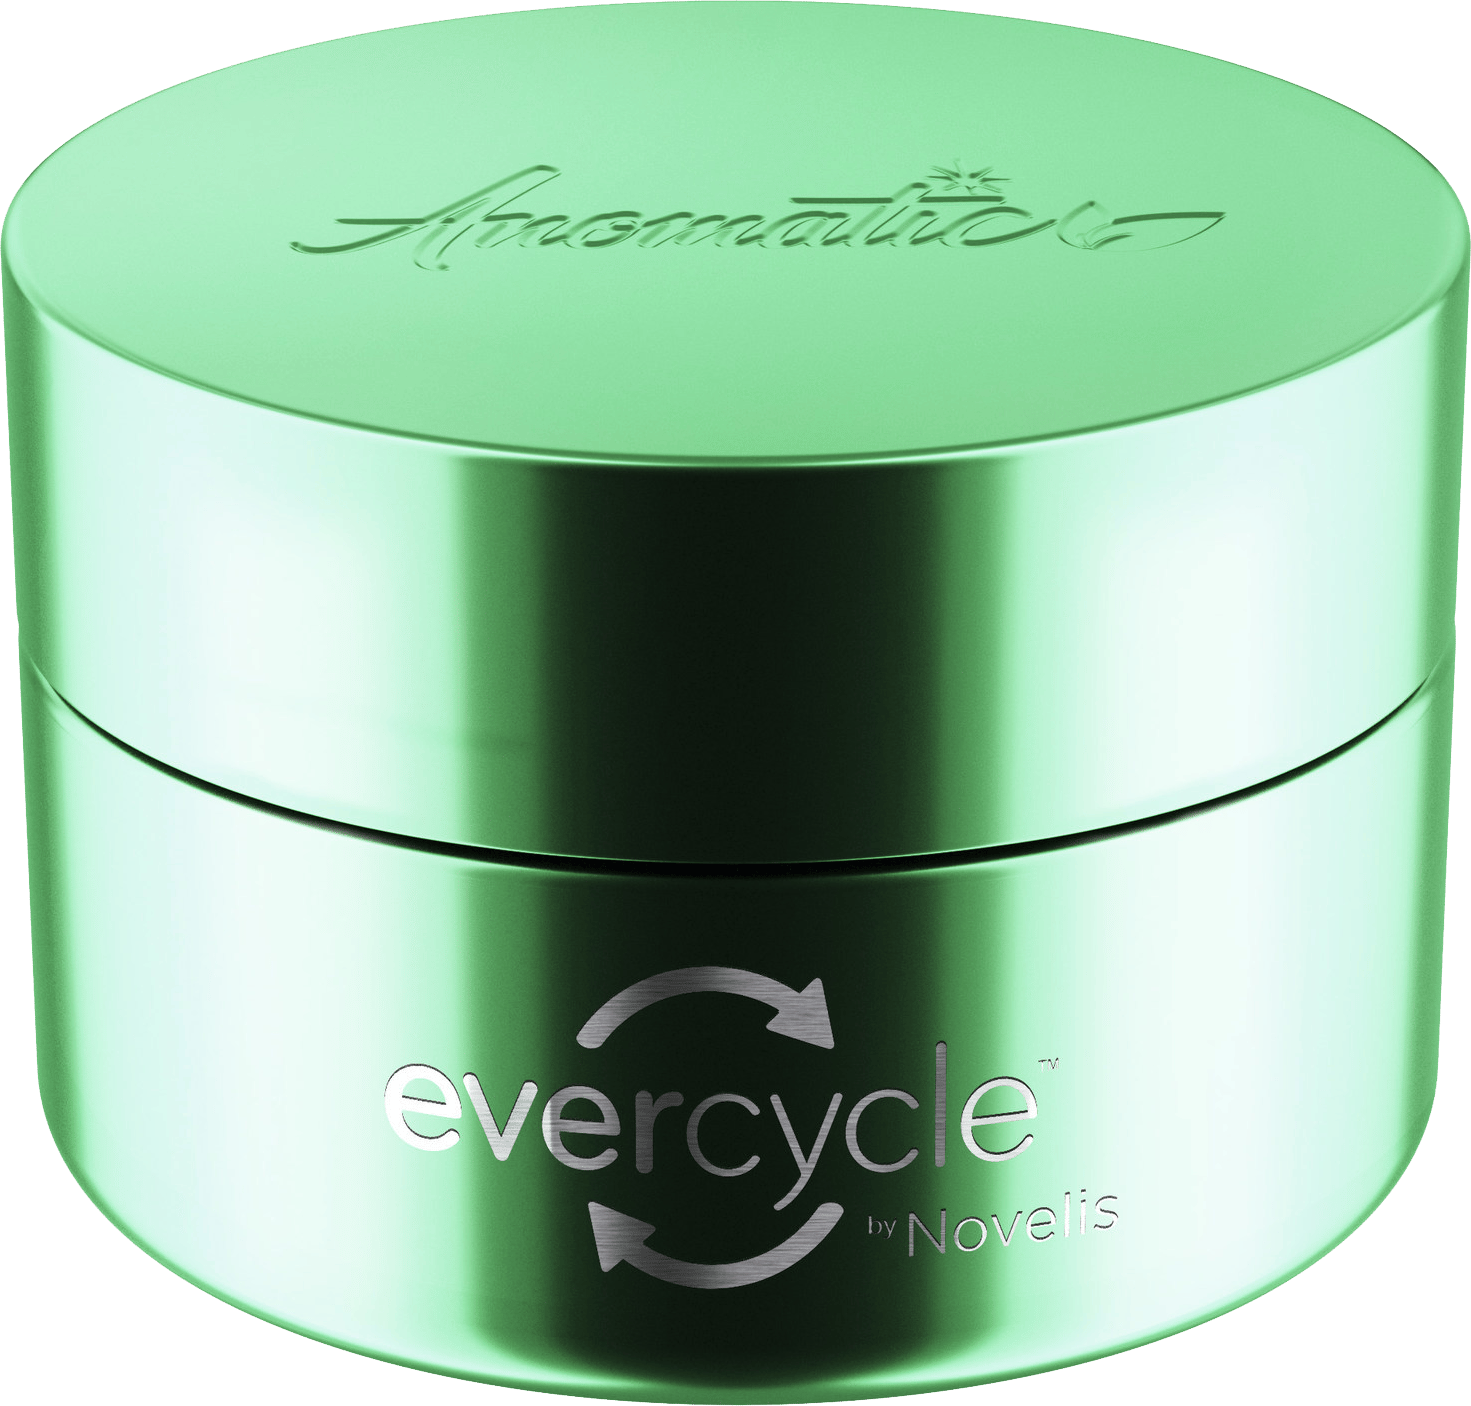 A Novelis cosmetics package made of 100% recycled aluminum